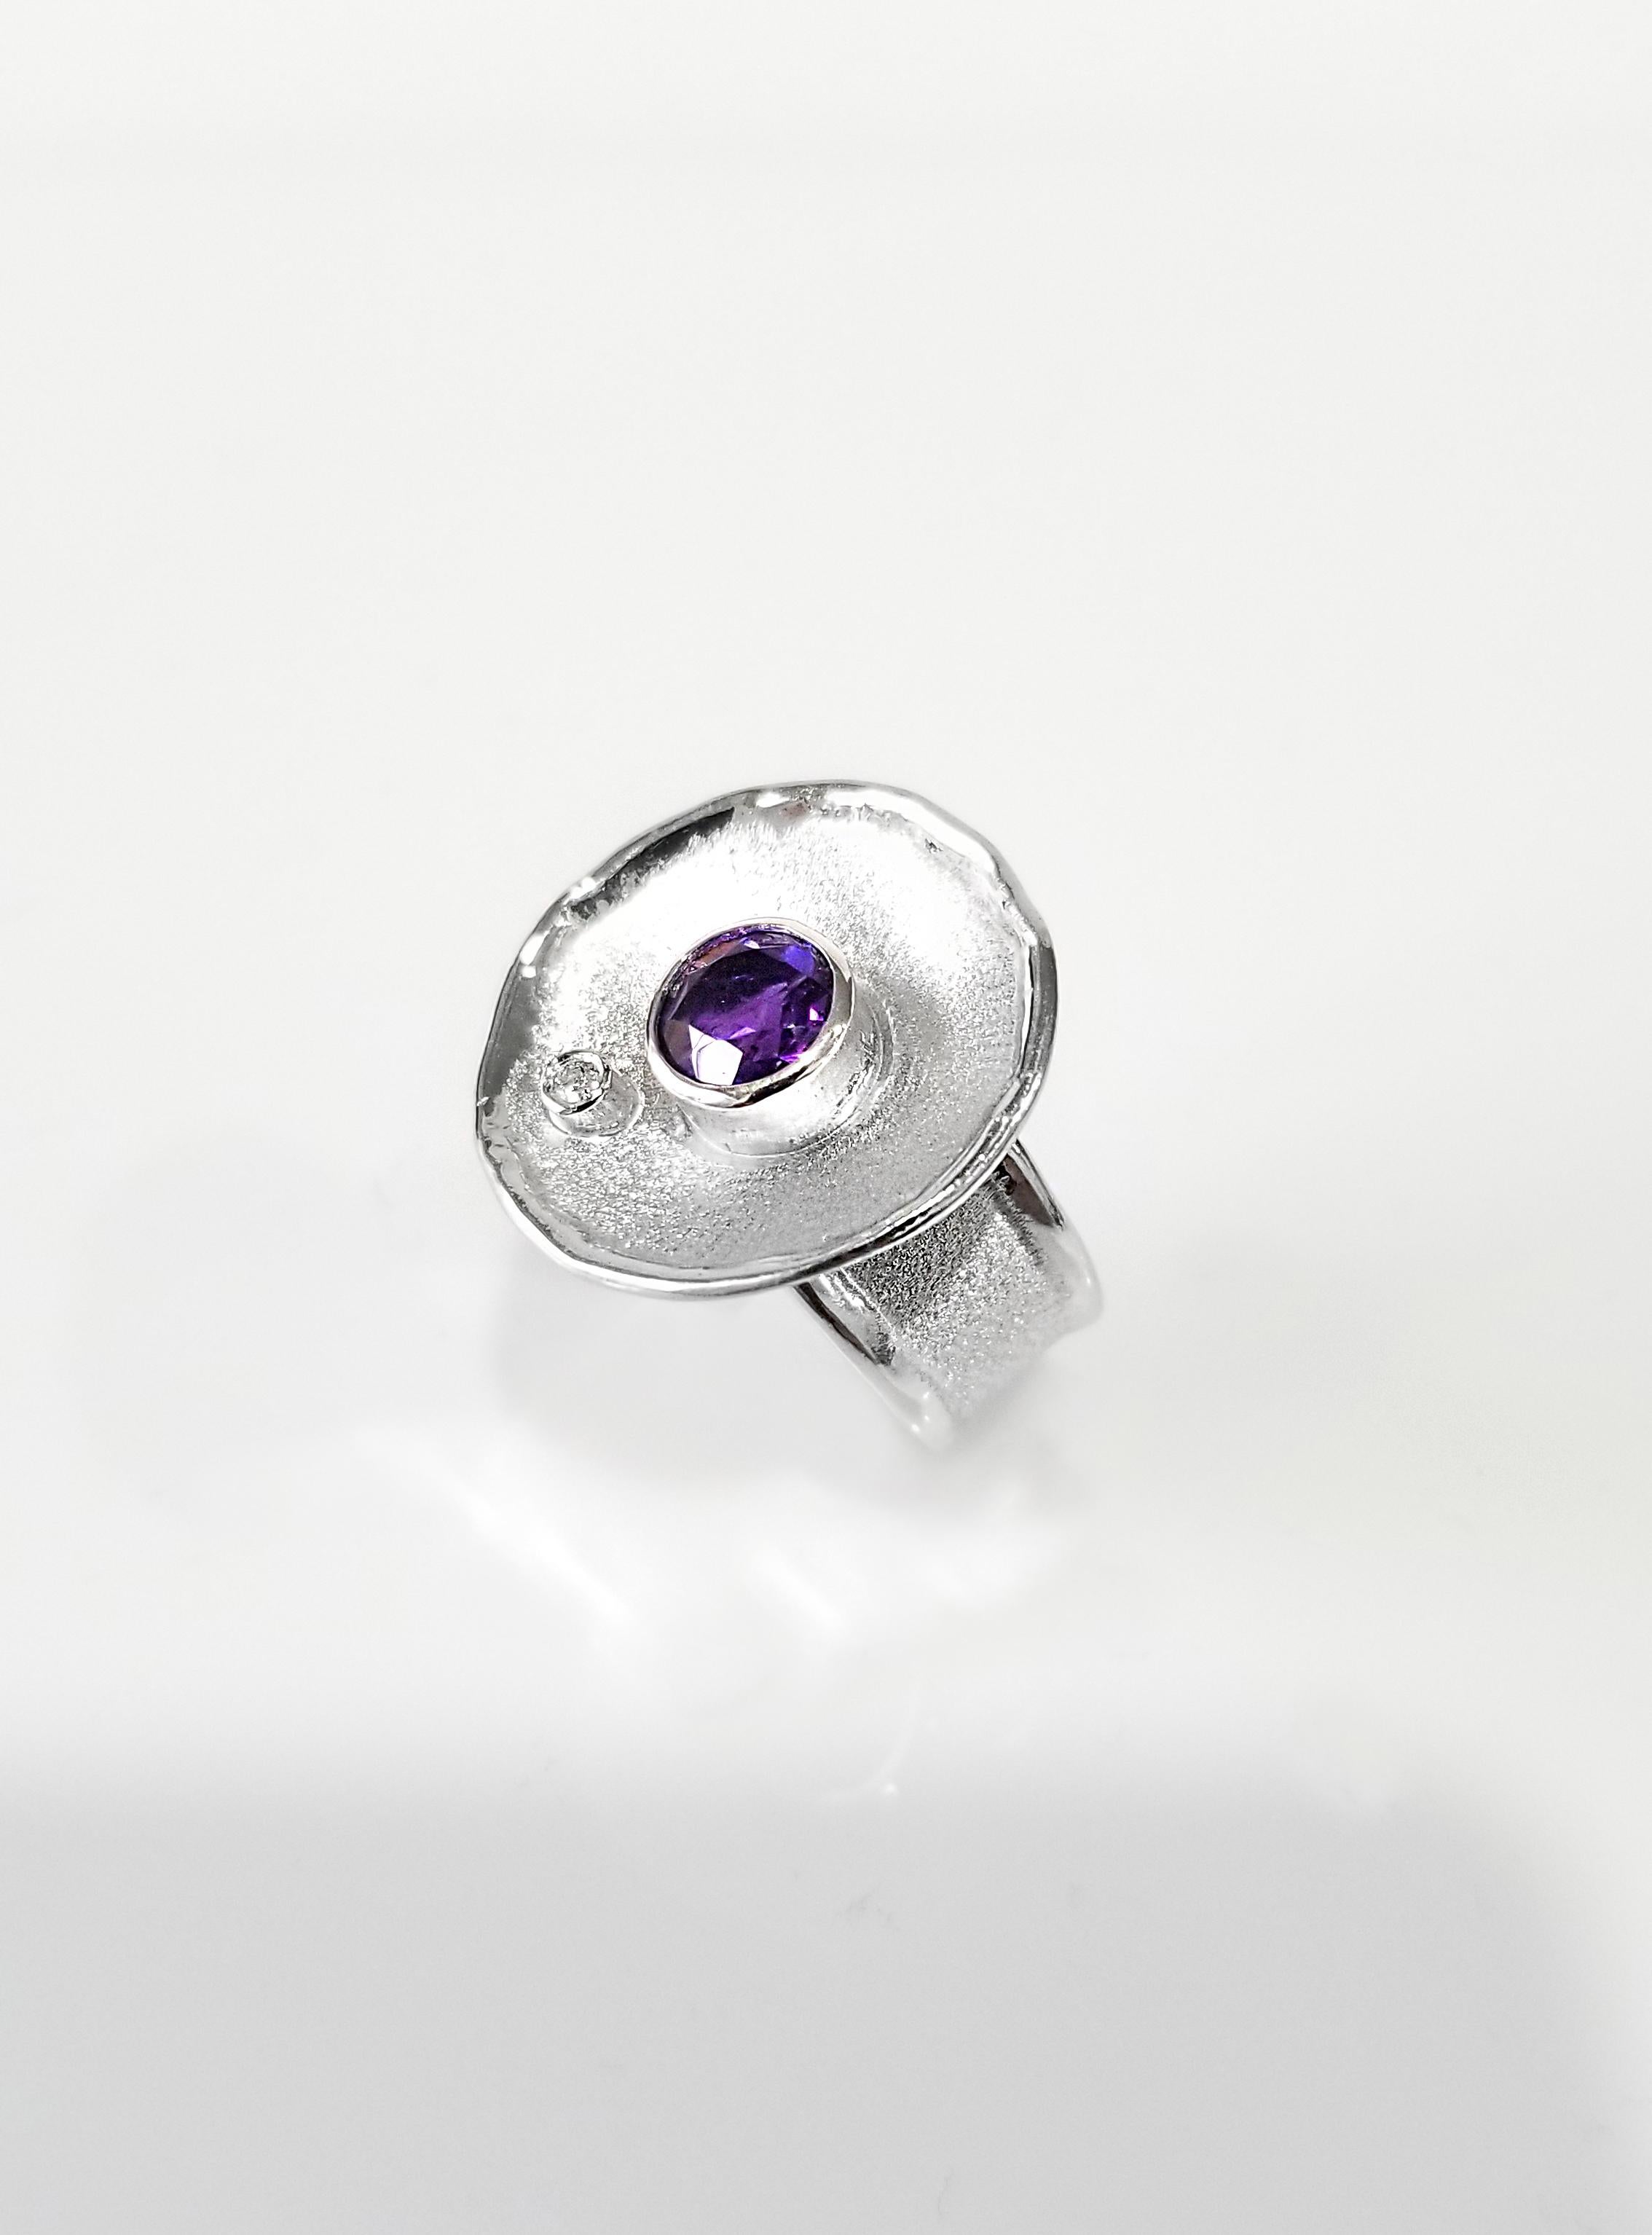 Presenting Yianni Creations Ammos Collection handmade artisan ring from fine silver 950 purity plated with palladium to resist against elements. This round ring features 1.30 carat round cut Amethyst accompanied by a 0.03-carat brilliant-cut white